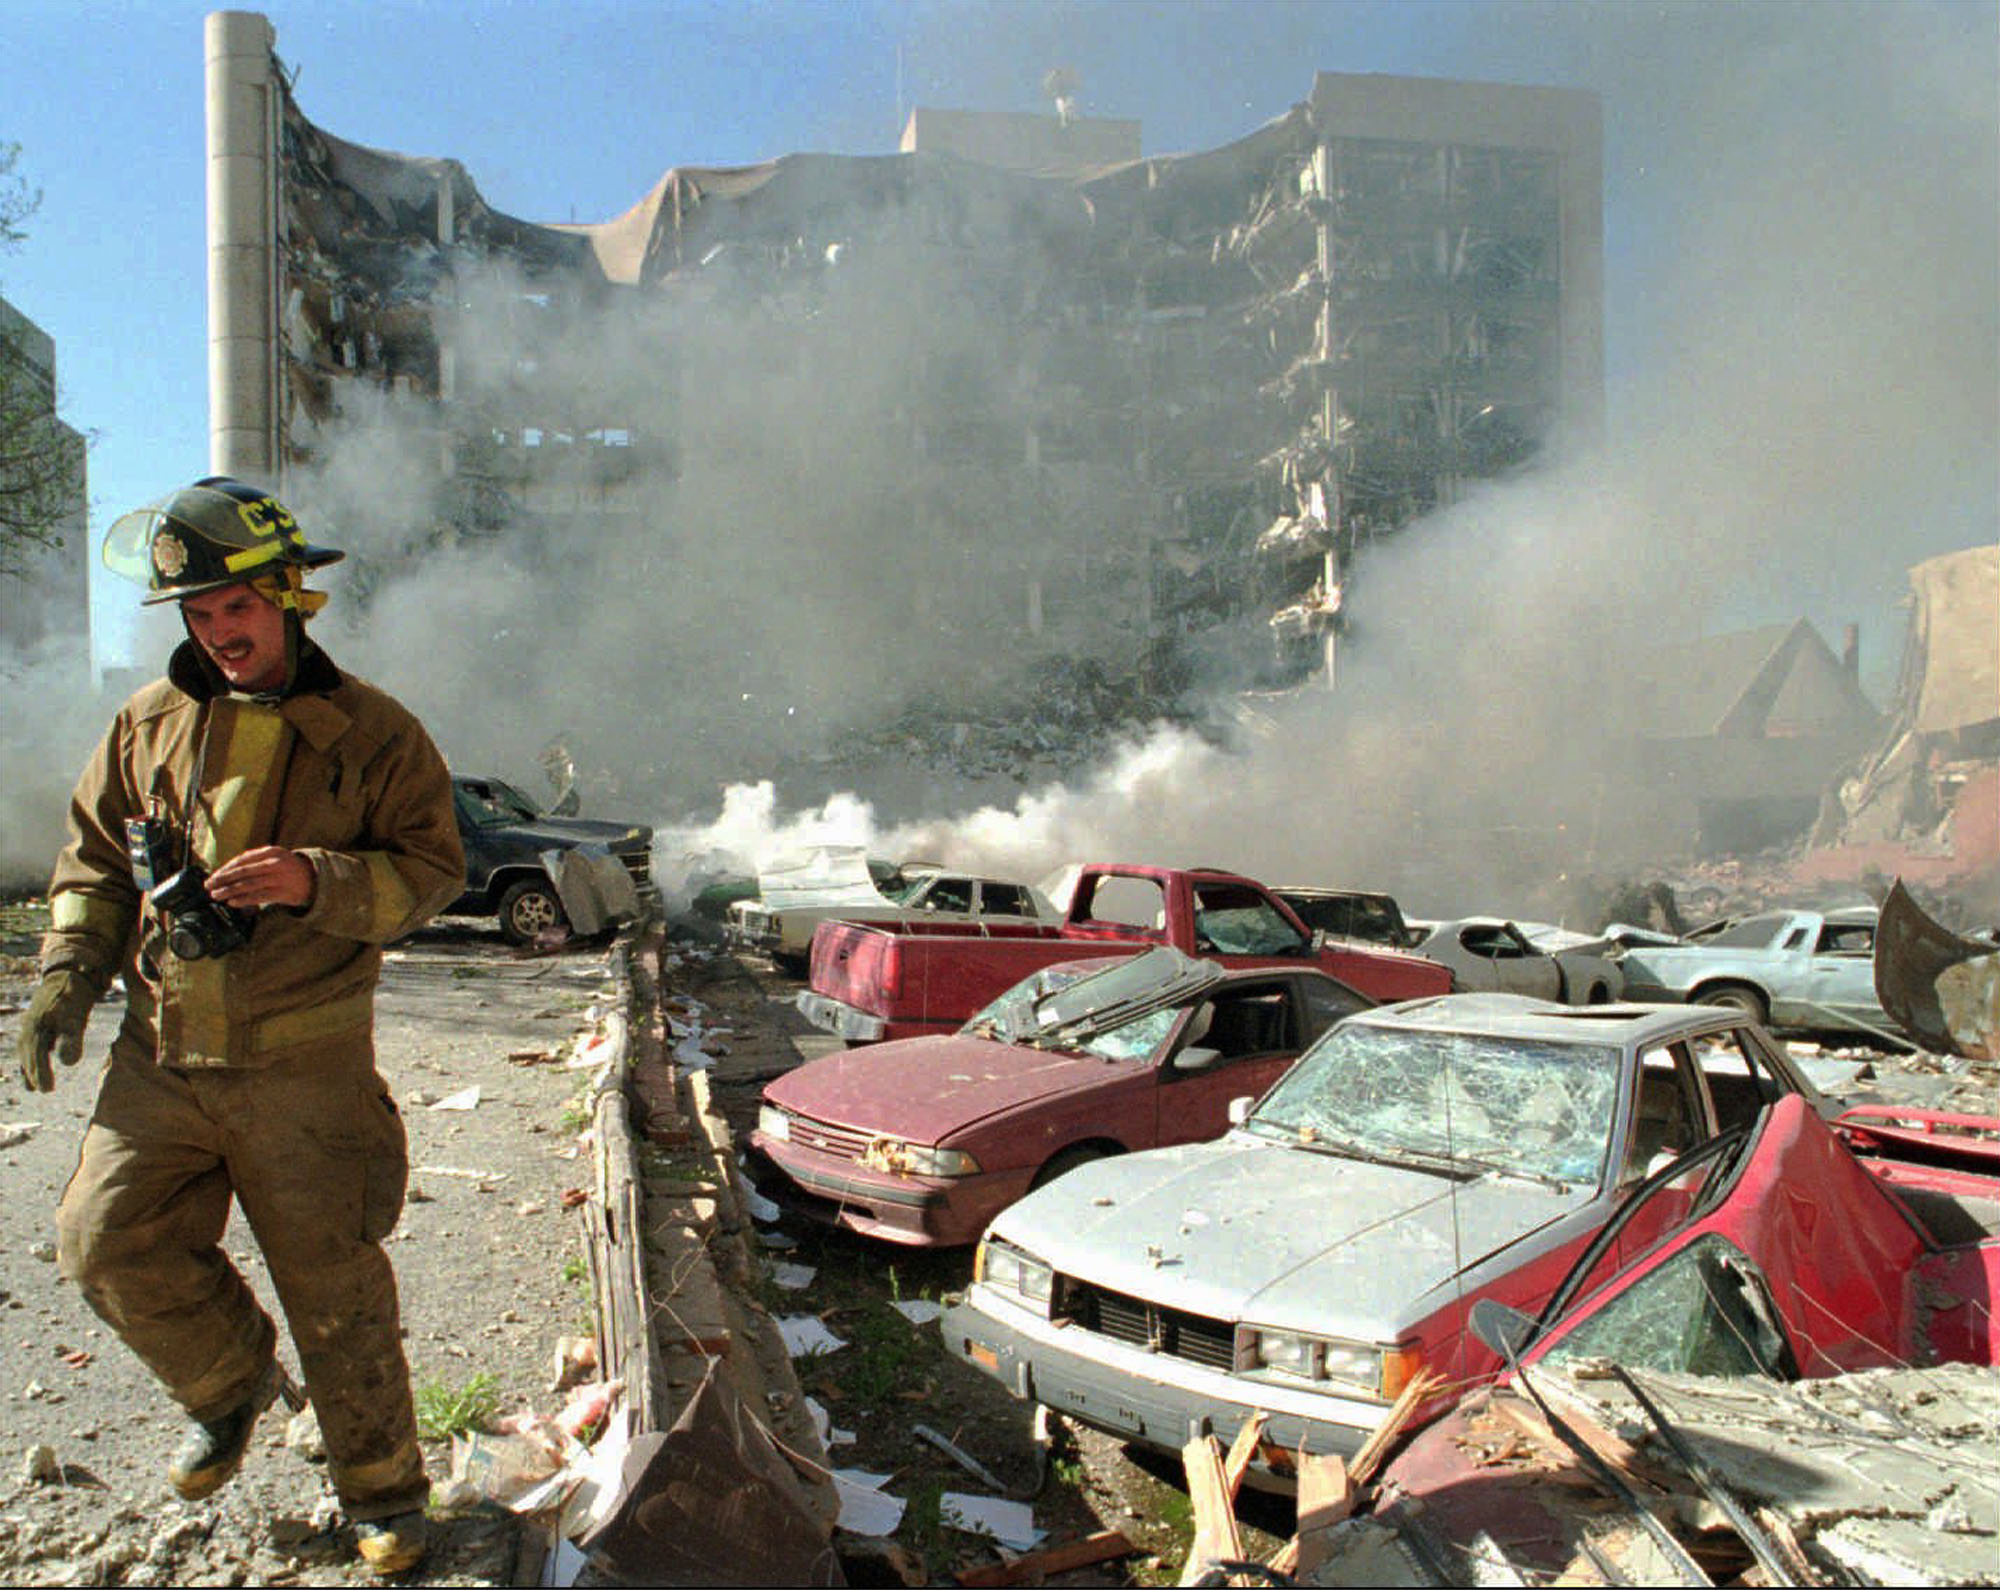 20-years-after-oklahoma-city-bombing-words-still-matter-huffpost